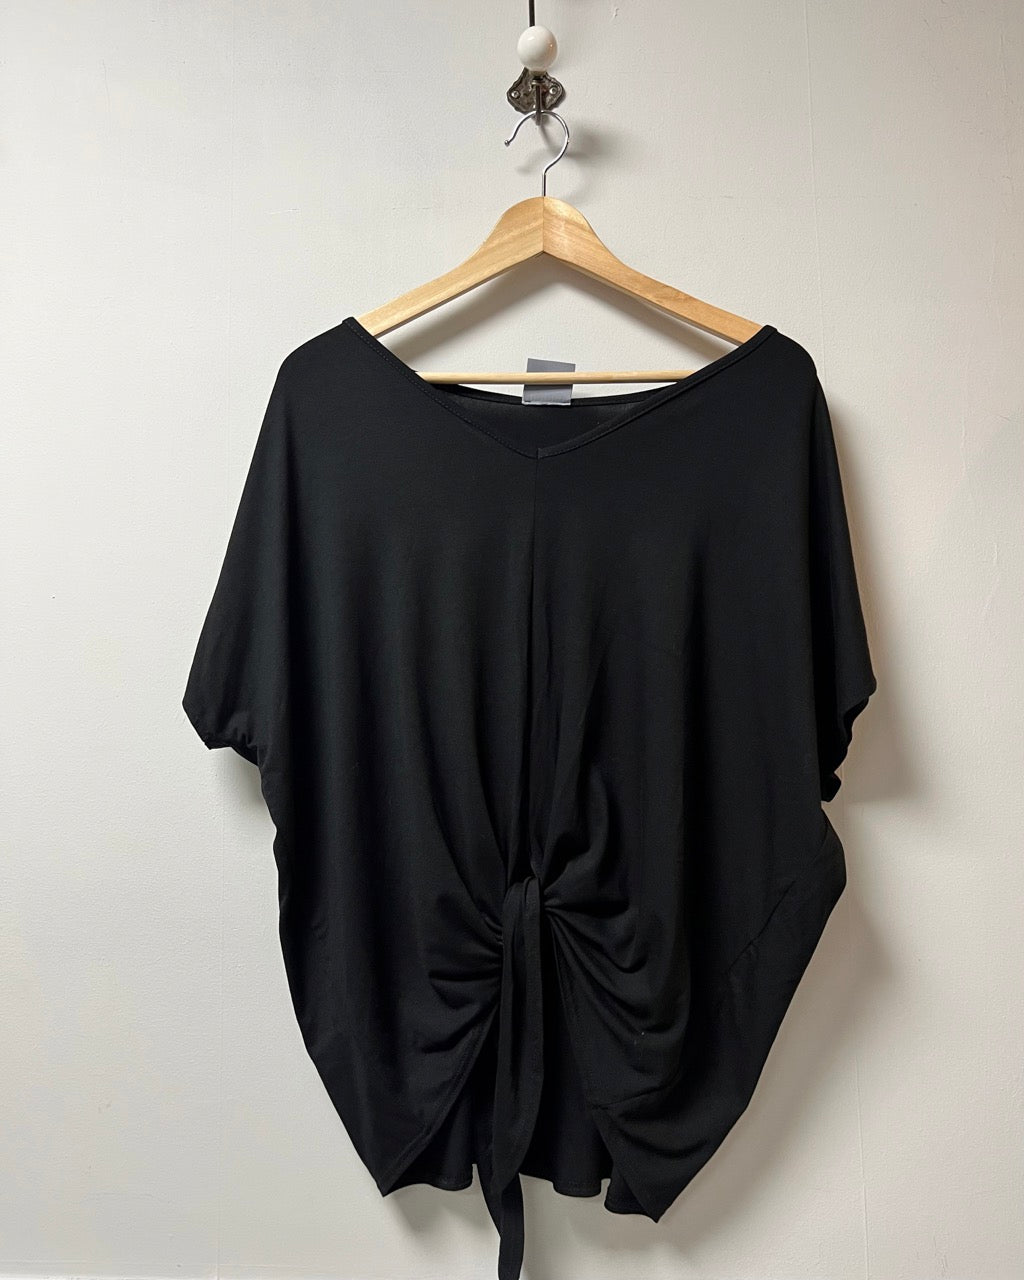 Black v neck loose fit jersey top with a tie front